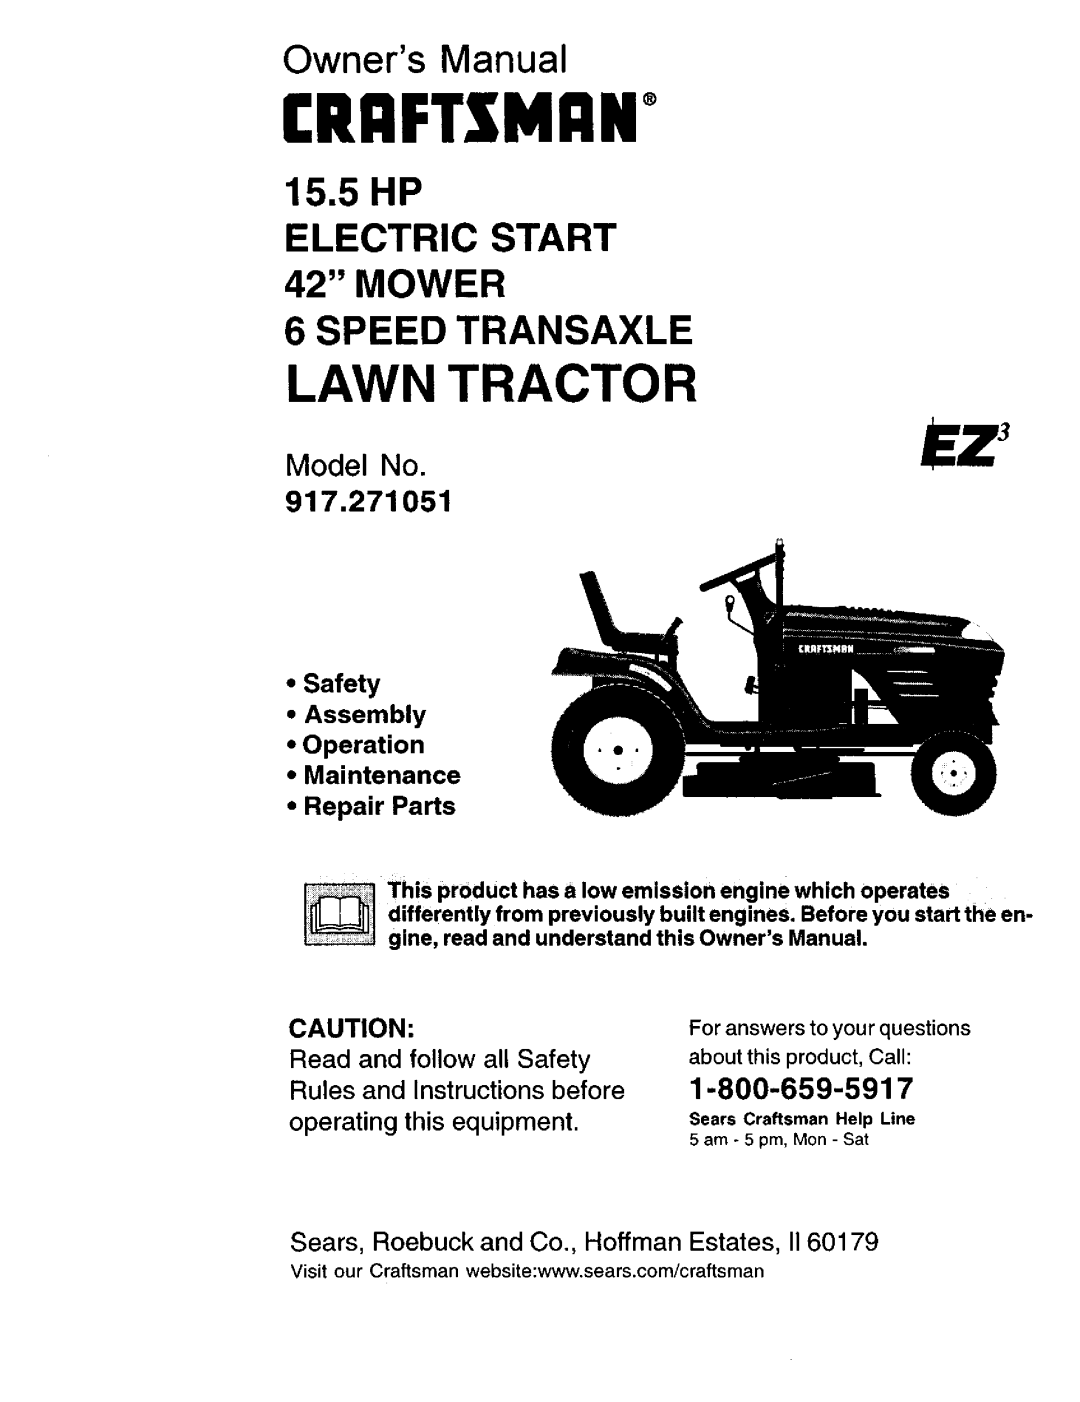 Sears 917.271051 owner manual 15.5HP ELECTRIC START 42 MOWER 6 SPEED TRANSAXLE, Model No, 1-800-659-5917, Rules and 